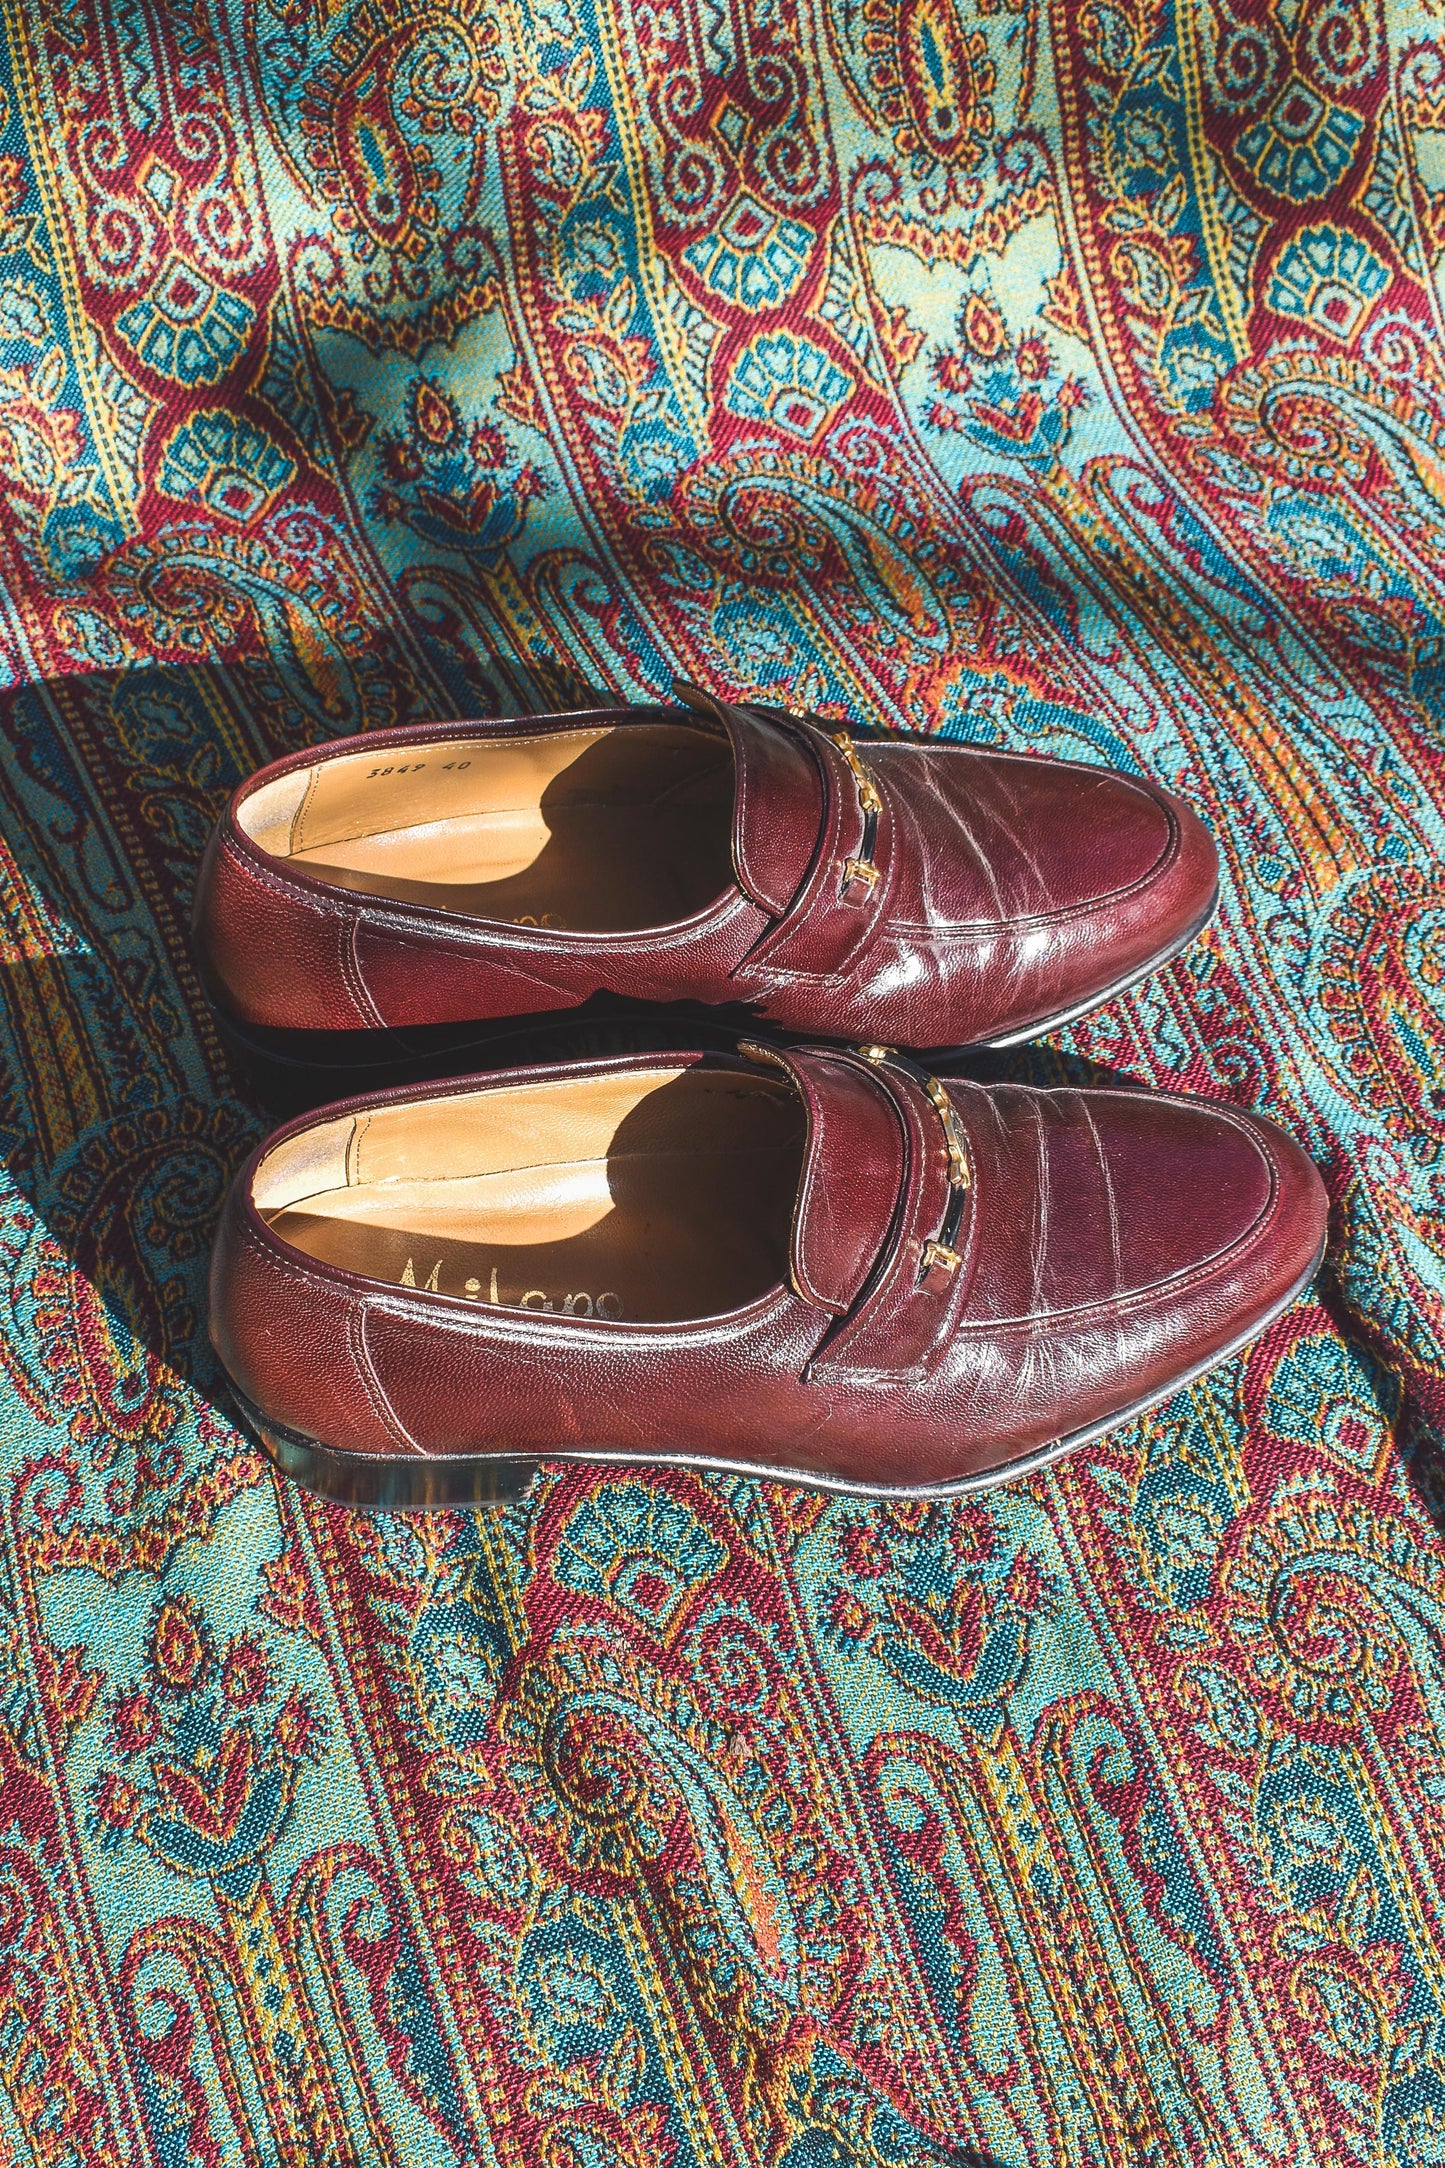 NEW IN! Vintage loafers